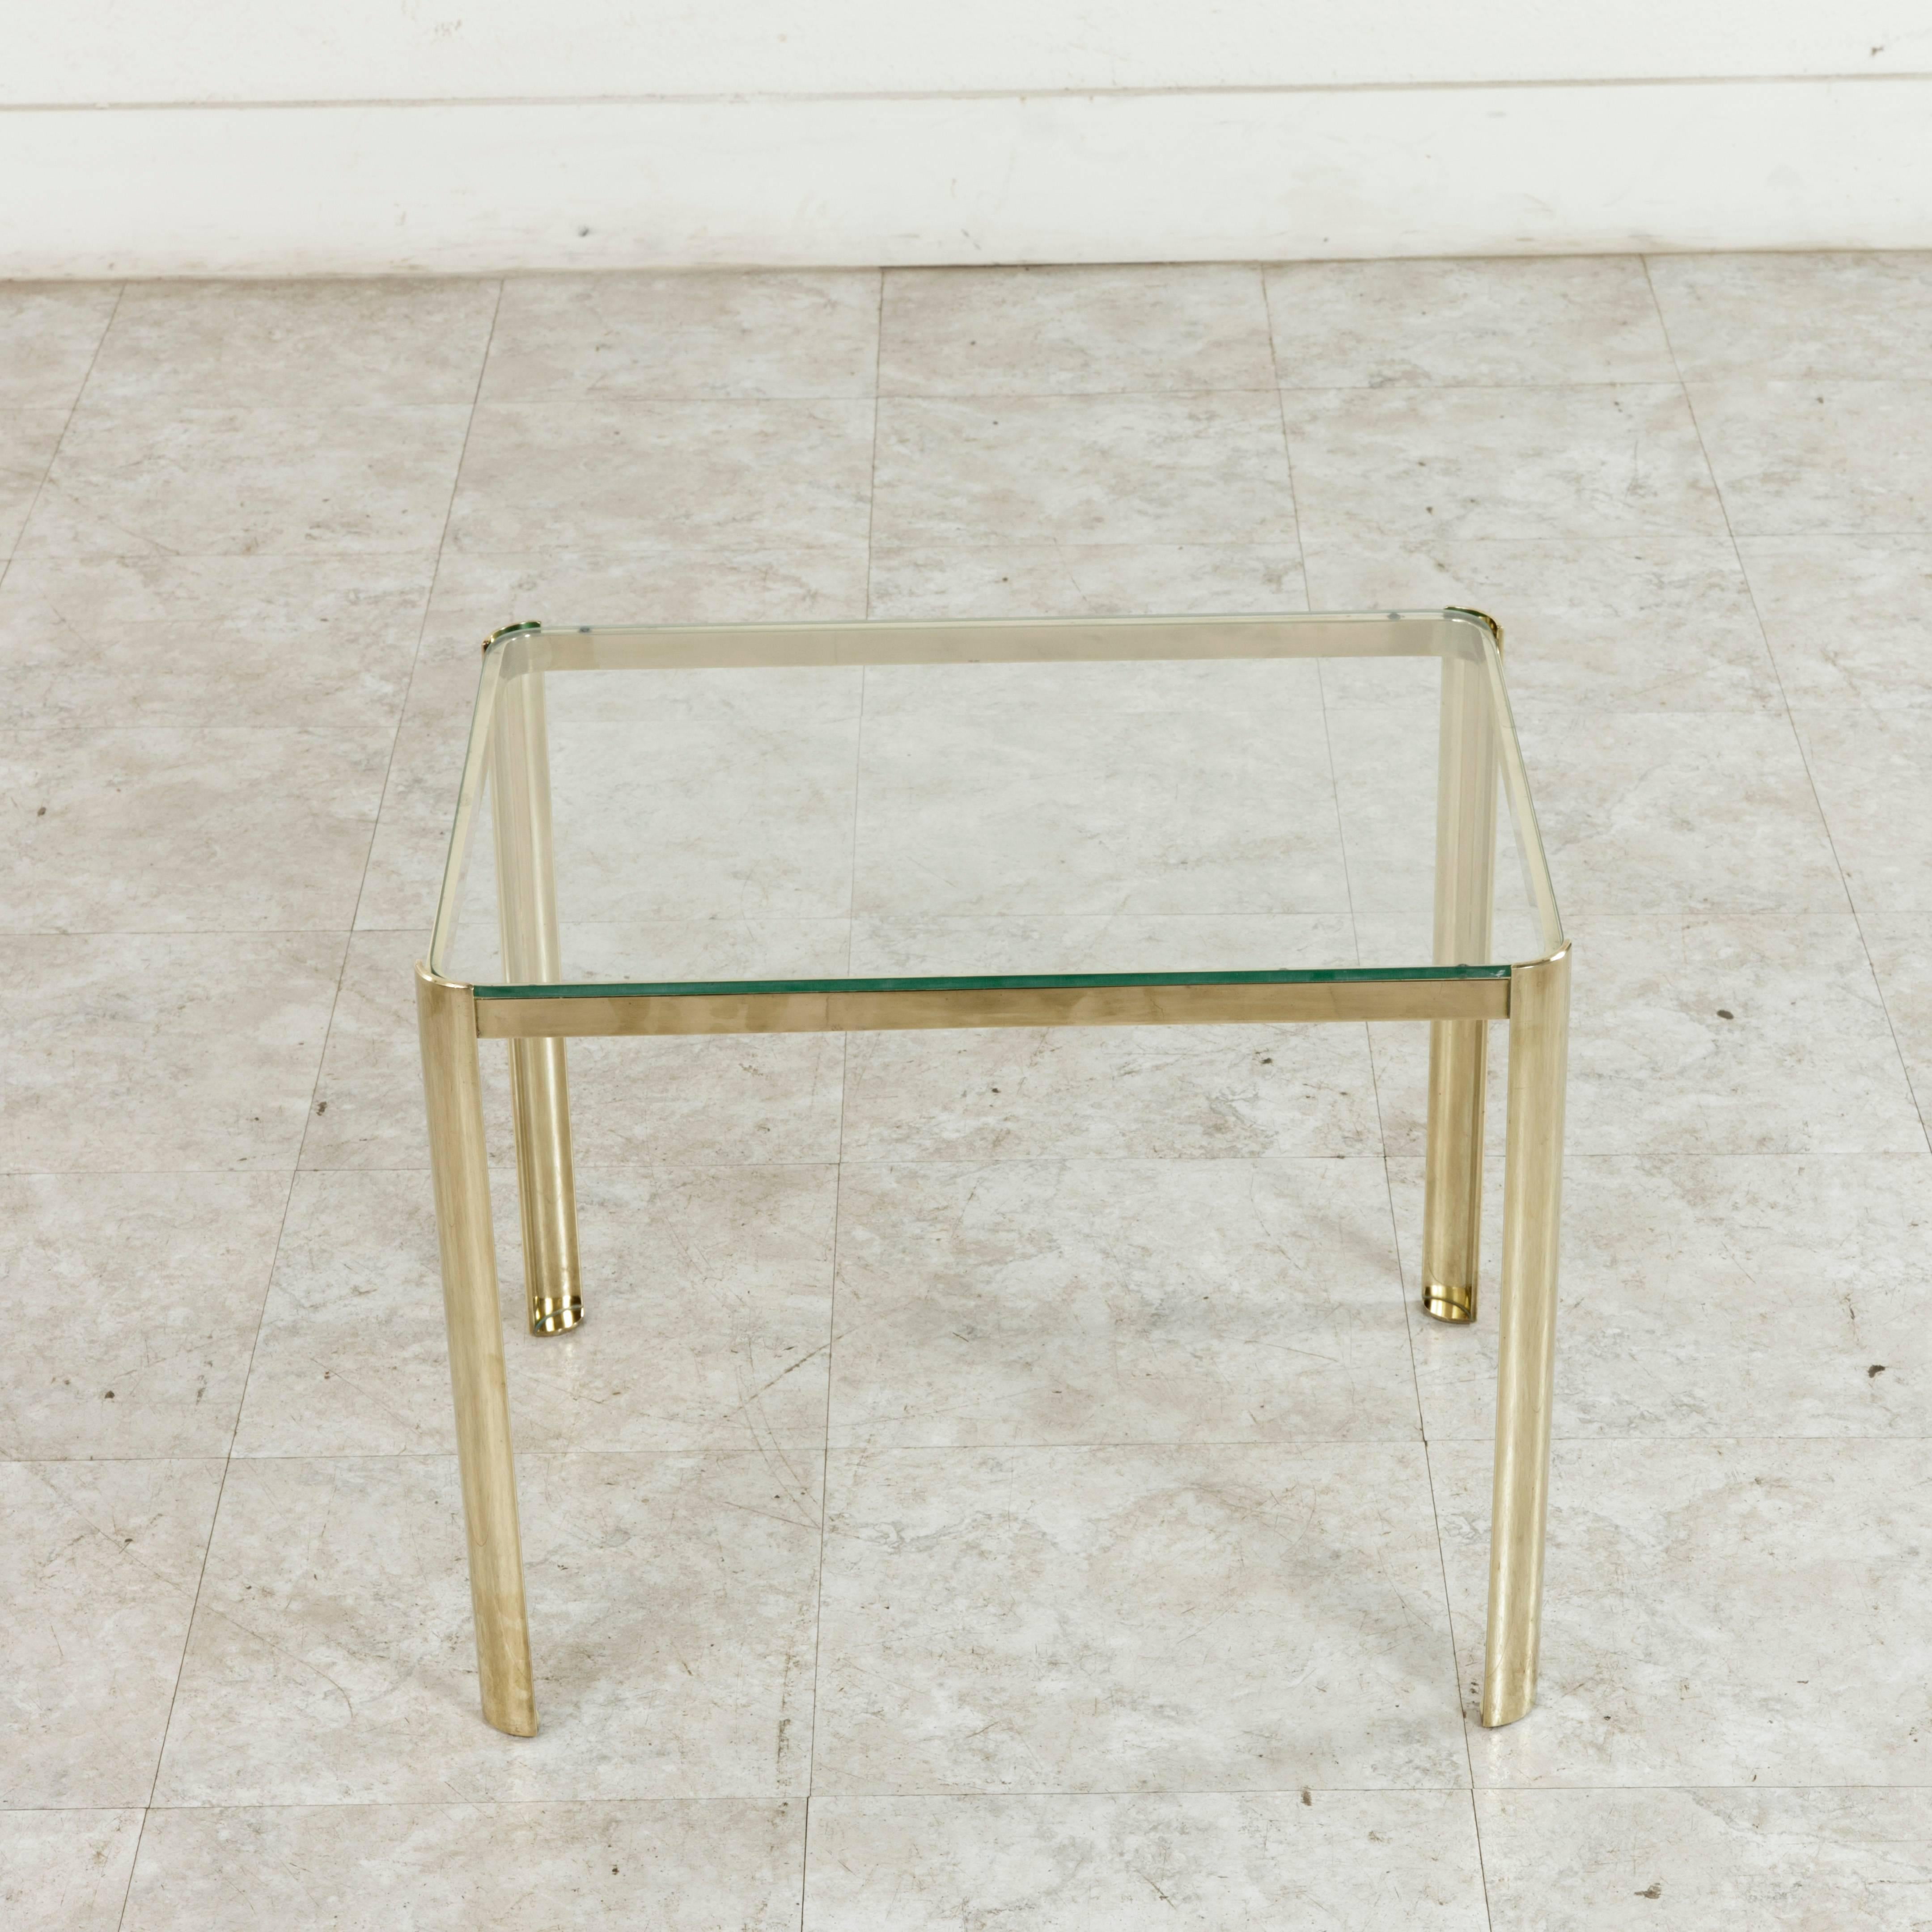 This small midcentury bronze and glass side table or cocktail table is classic 1960s Jacques Quinet. The renowned twentieth century French designer drew his inspiration from the neoclassical aesthetic in architecture and interpreted it in his own